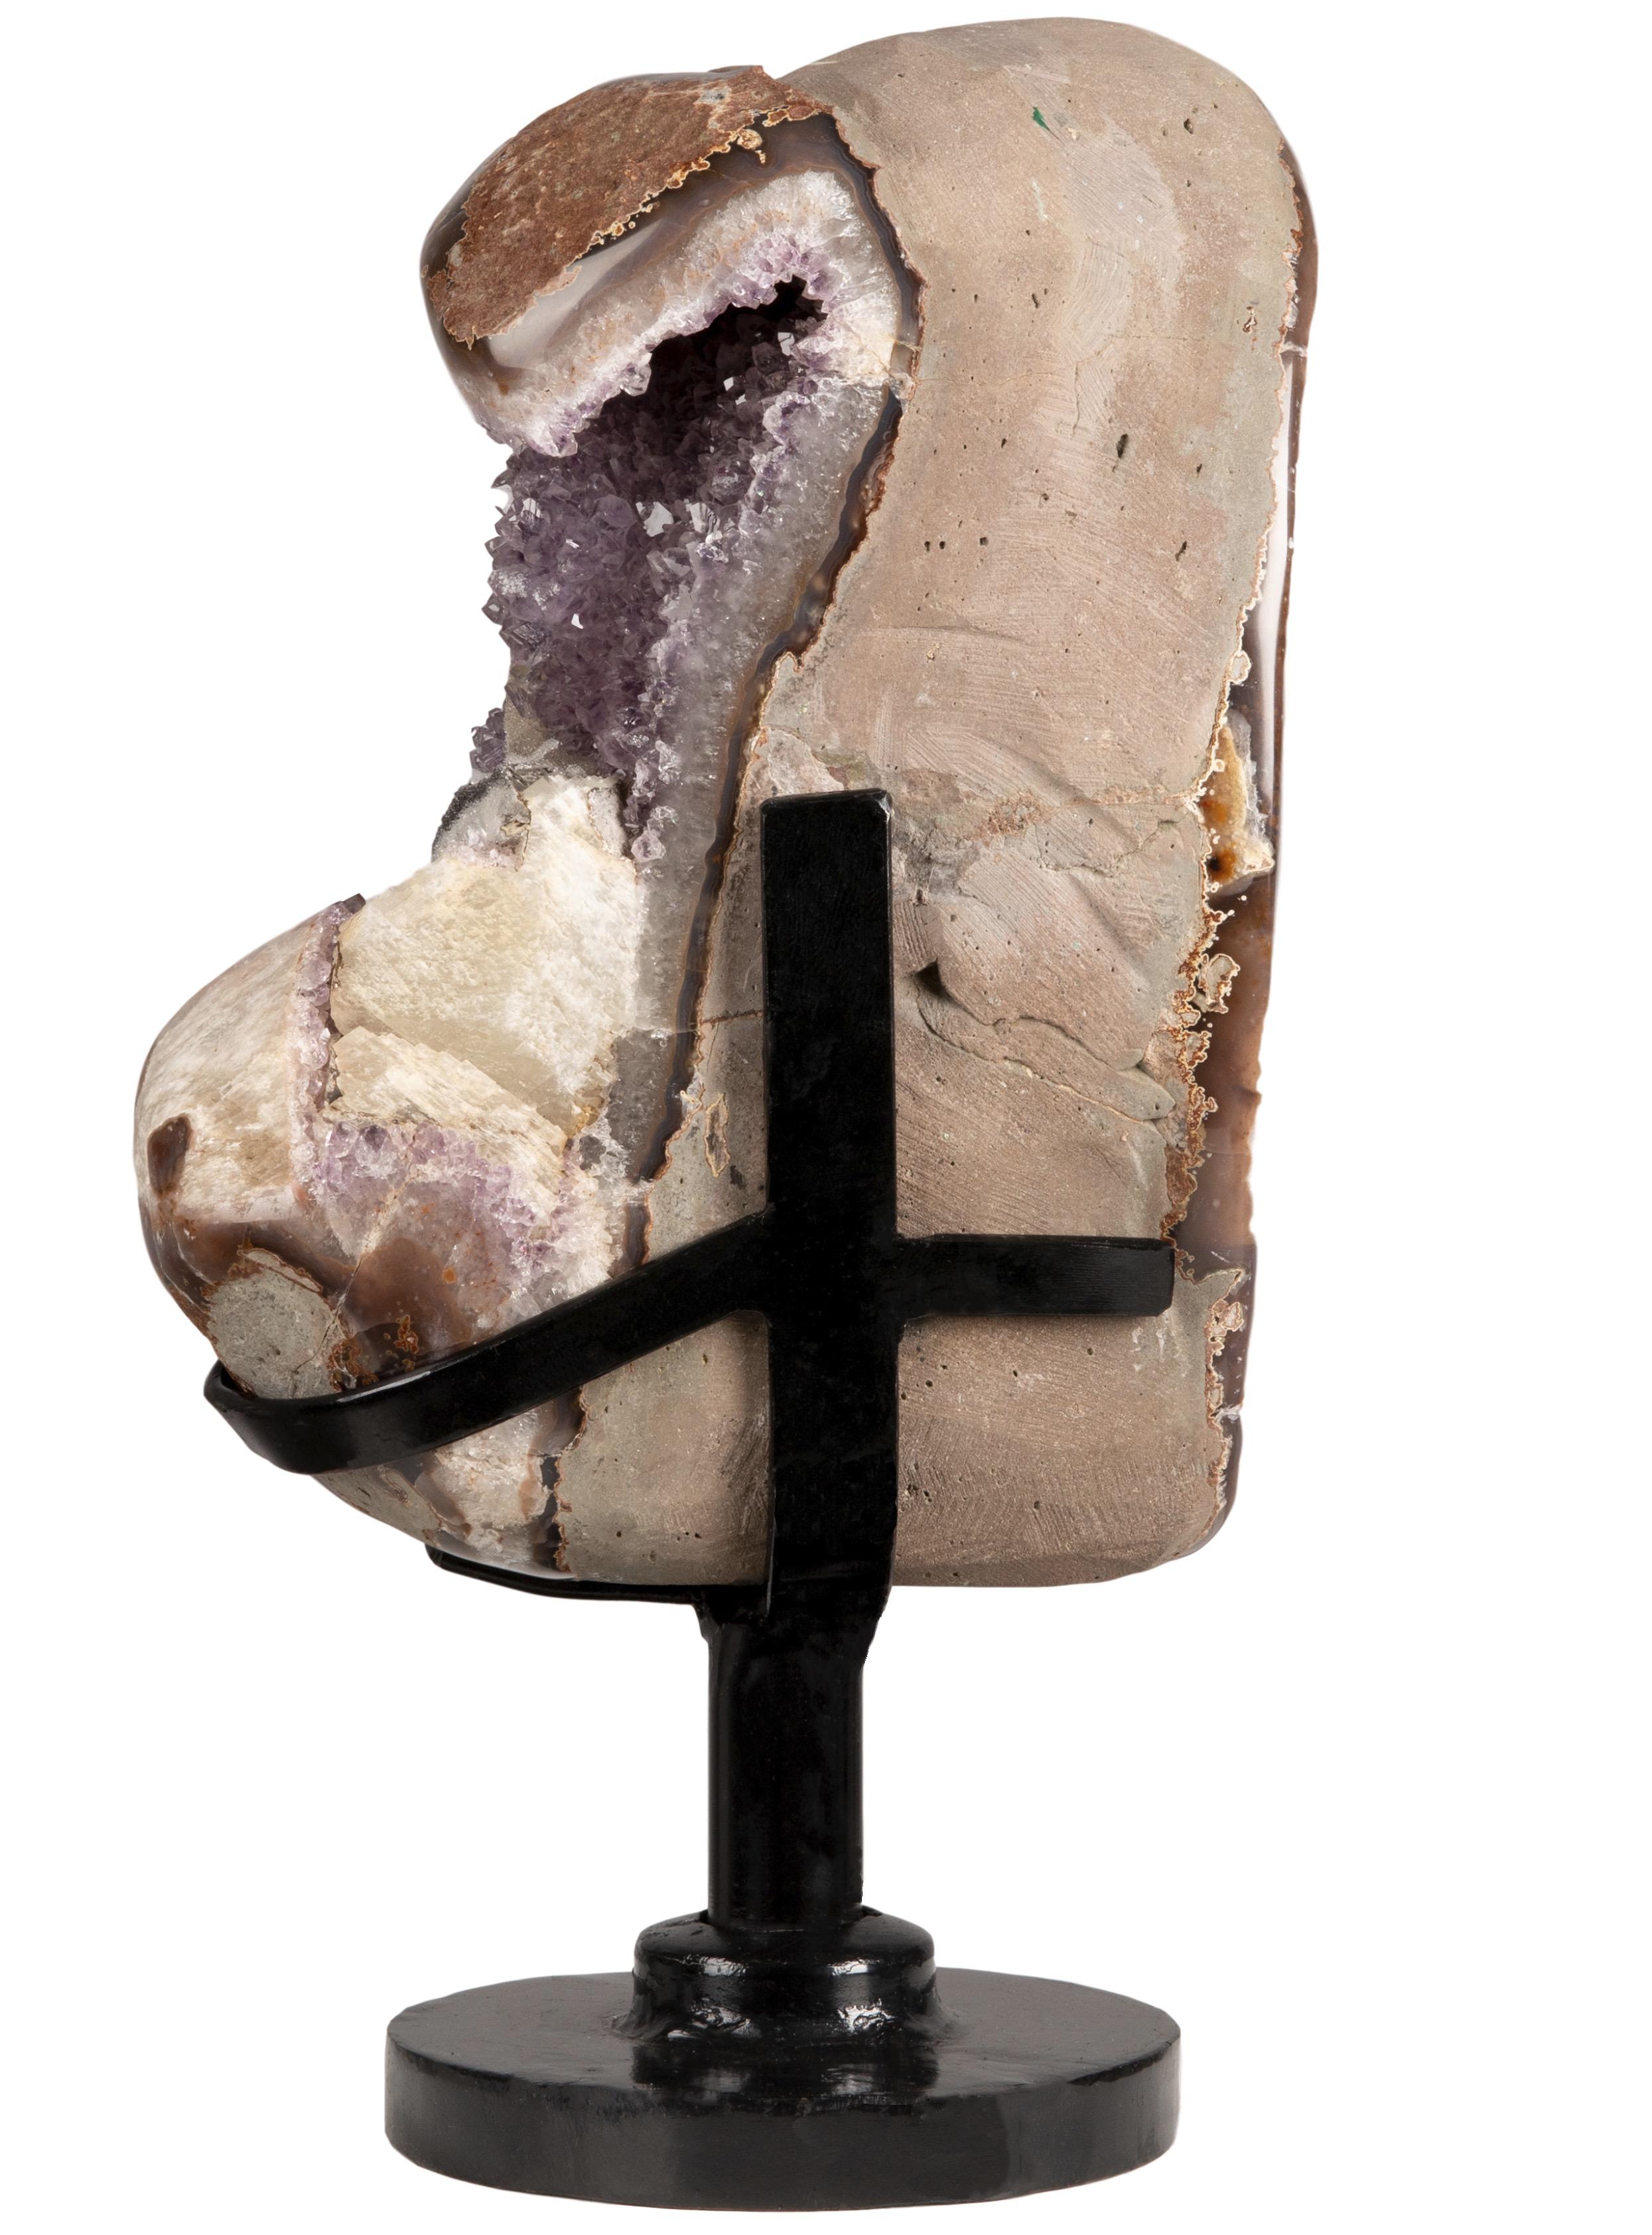 Uruguayan Sculptural Geode Heart with Amethyst and Druze, Agate, White Quartz and Calcite For Sale